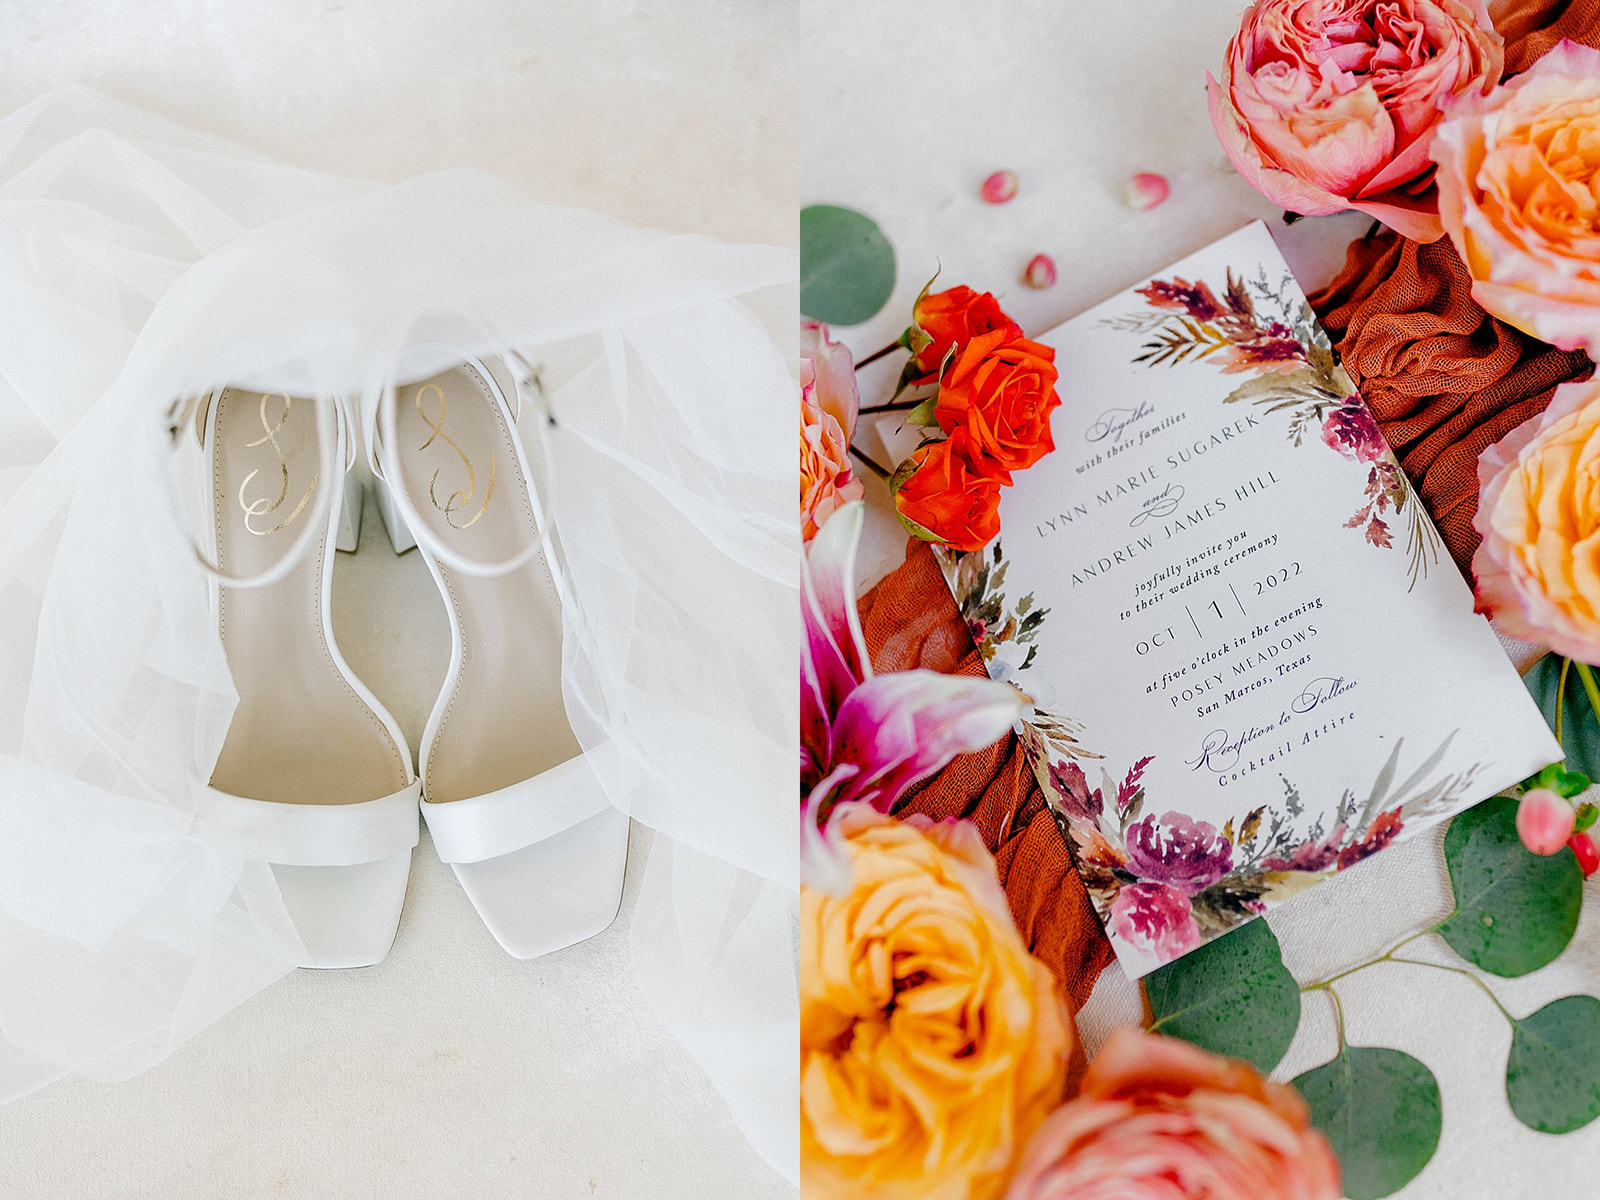 Bridal Shoes for Fall Wedding